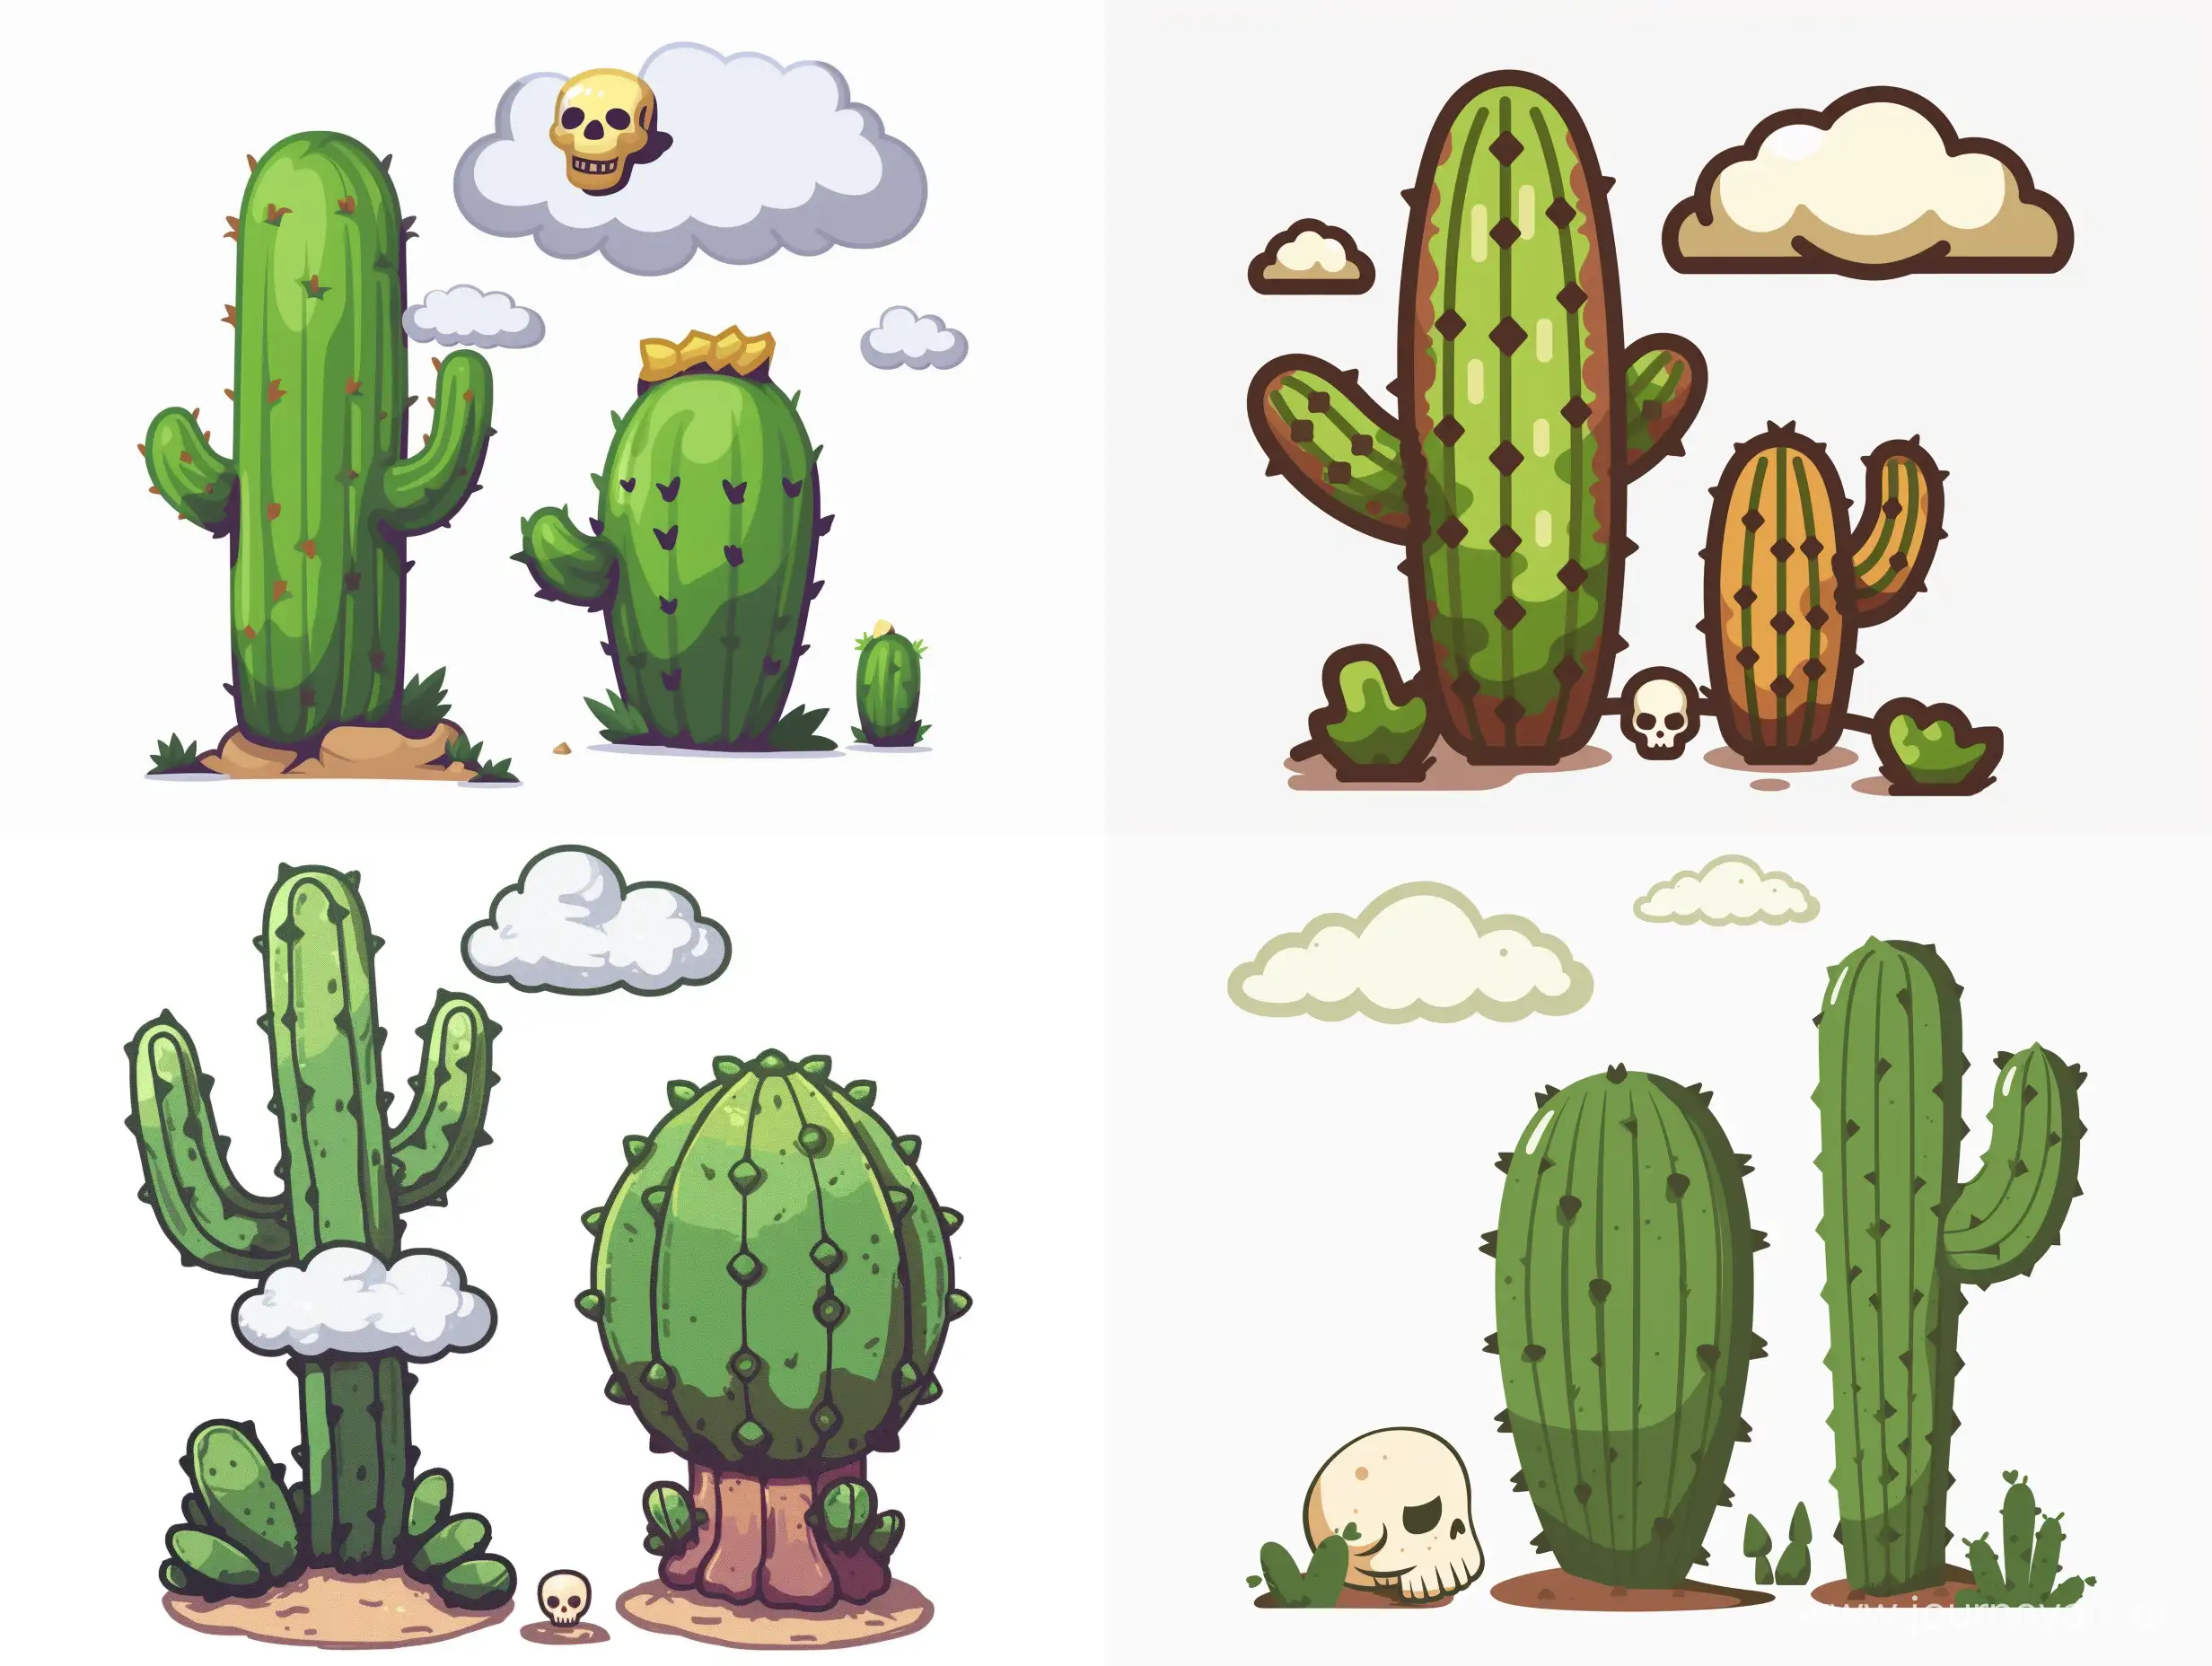 Create an image os two cactus ( one big another medium ) with two clouds above then.  Near cactus base, place an tiny skull. Use white background and style as 2d game image with flat colors.